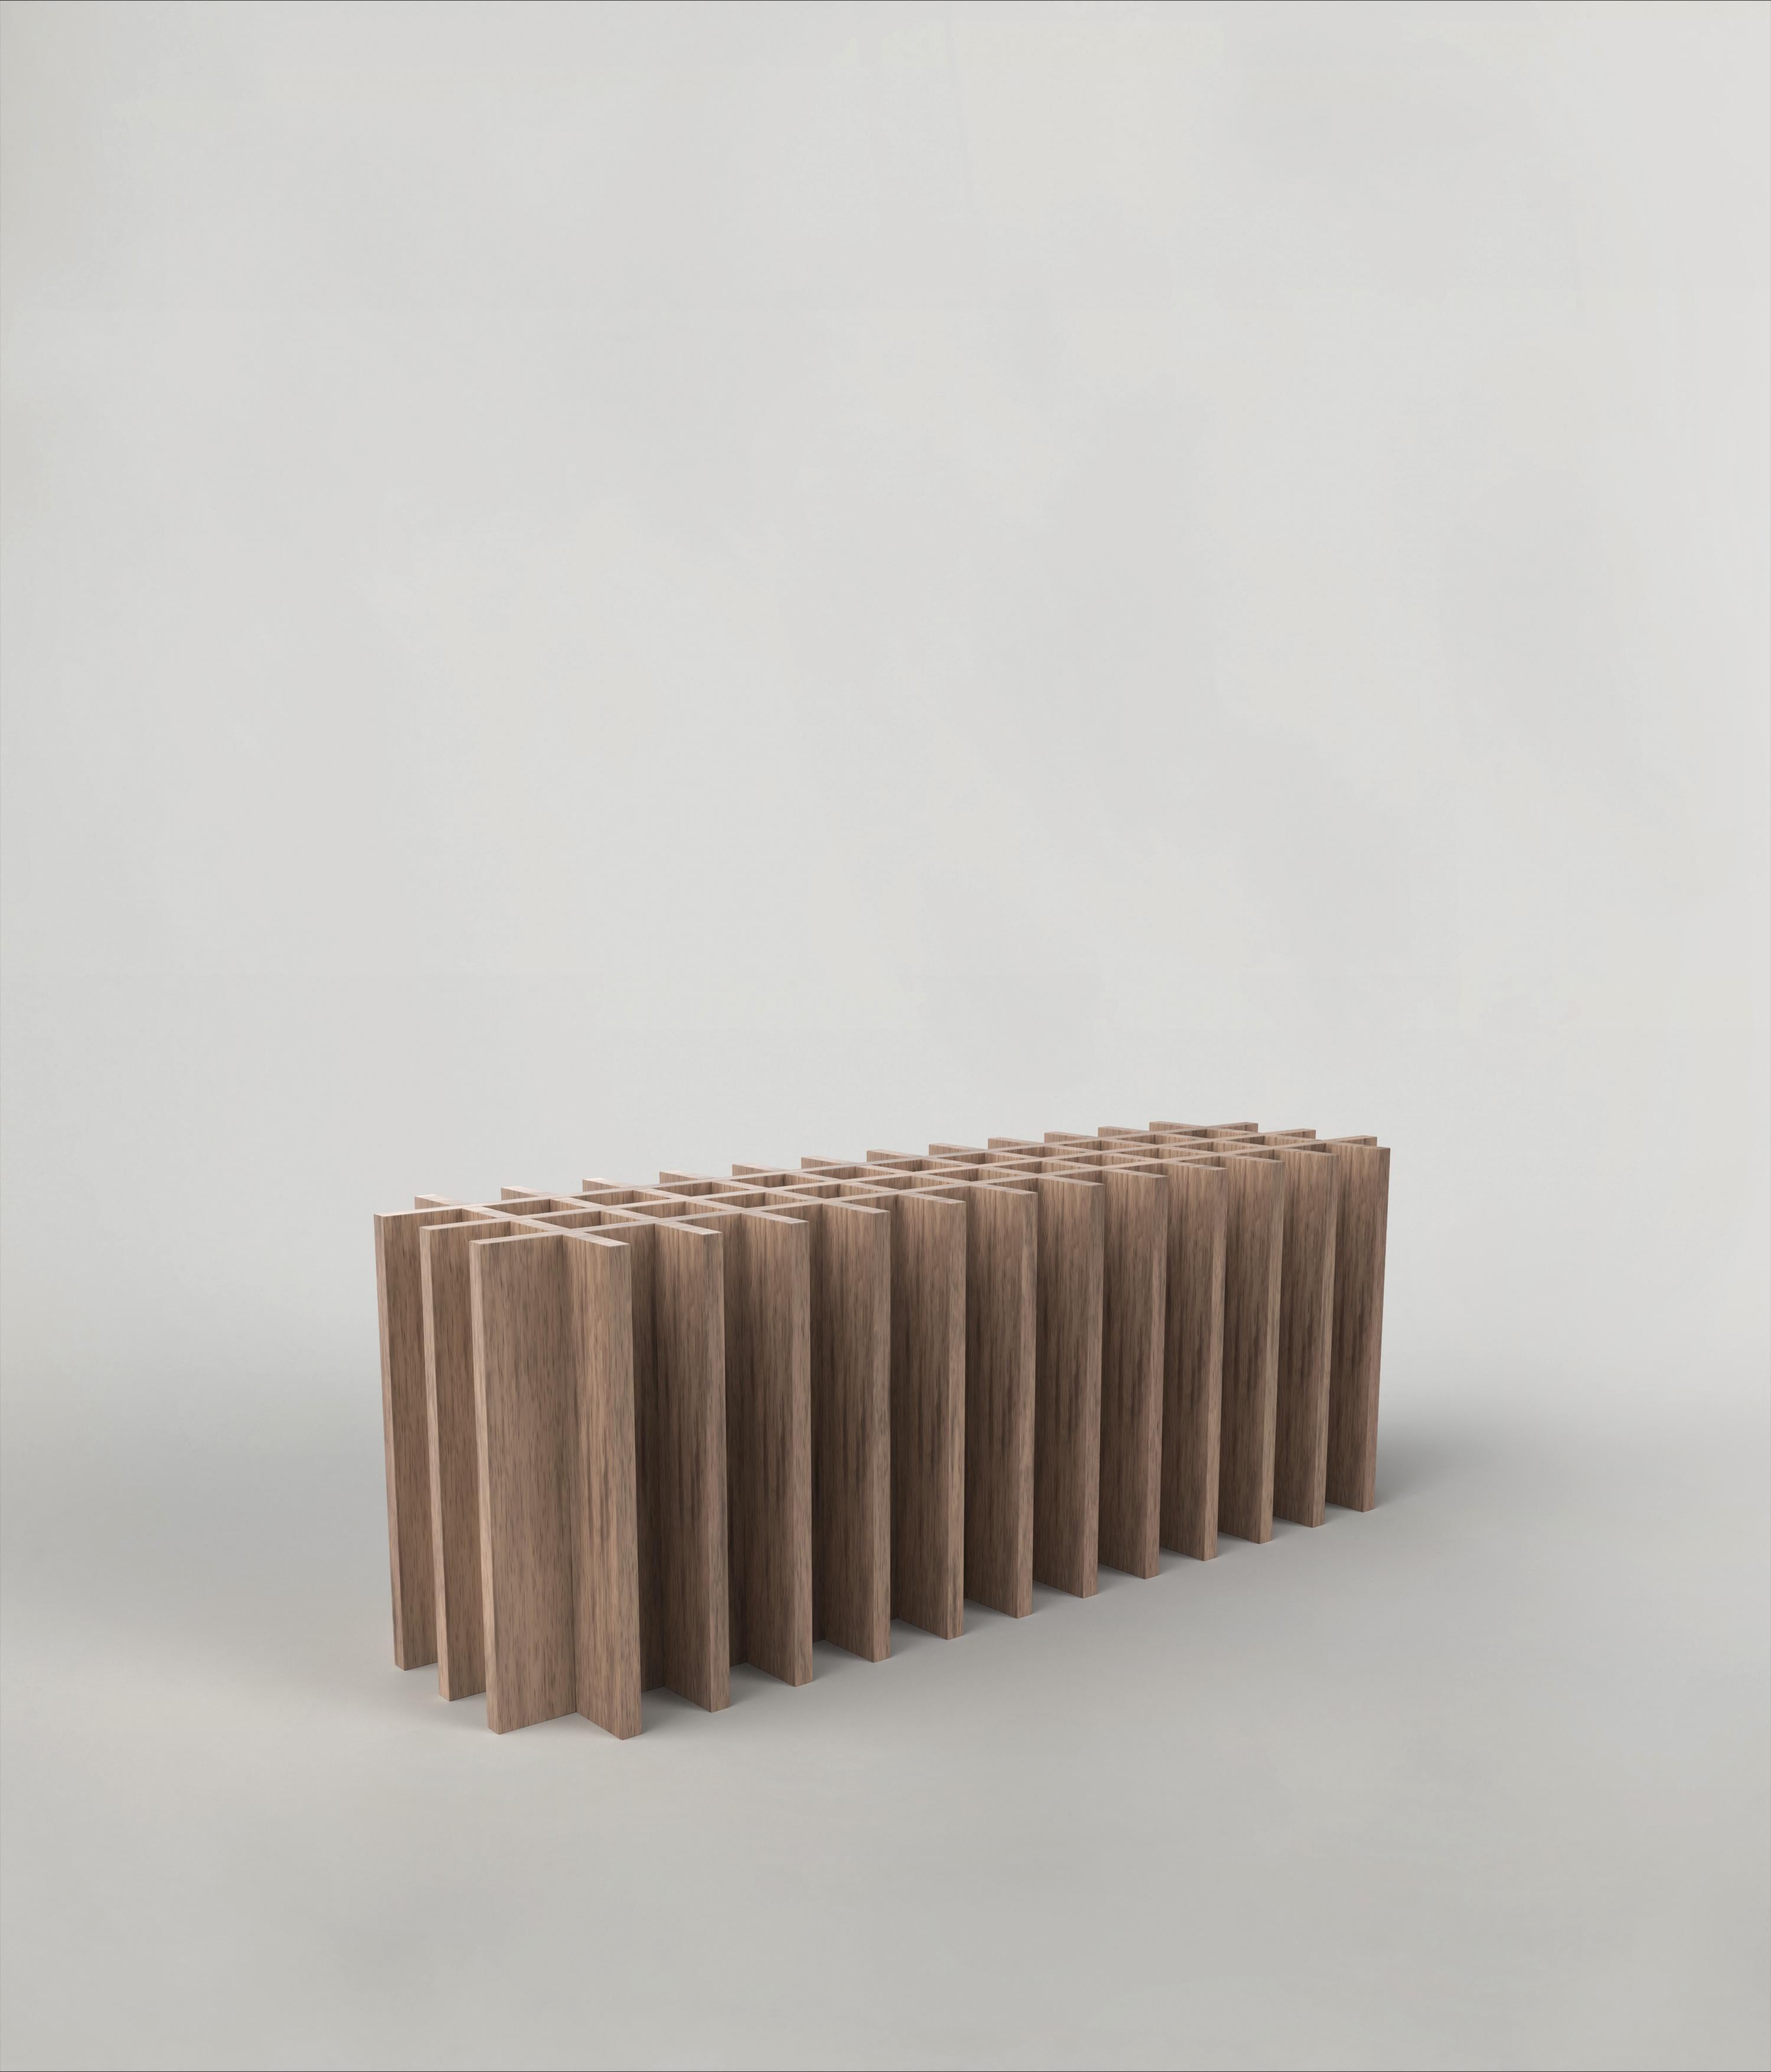 Arca V2 bench by Edizione Limitata
Limited edition of 150 pieces. Signed and numbered.
Dimensions: D117 x W35 x H42 cm
Materials: solid ash wood

These contemporary solid wood pieces are manufactured by the excellence of Italian craftmanship.